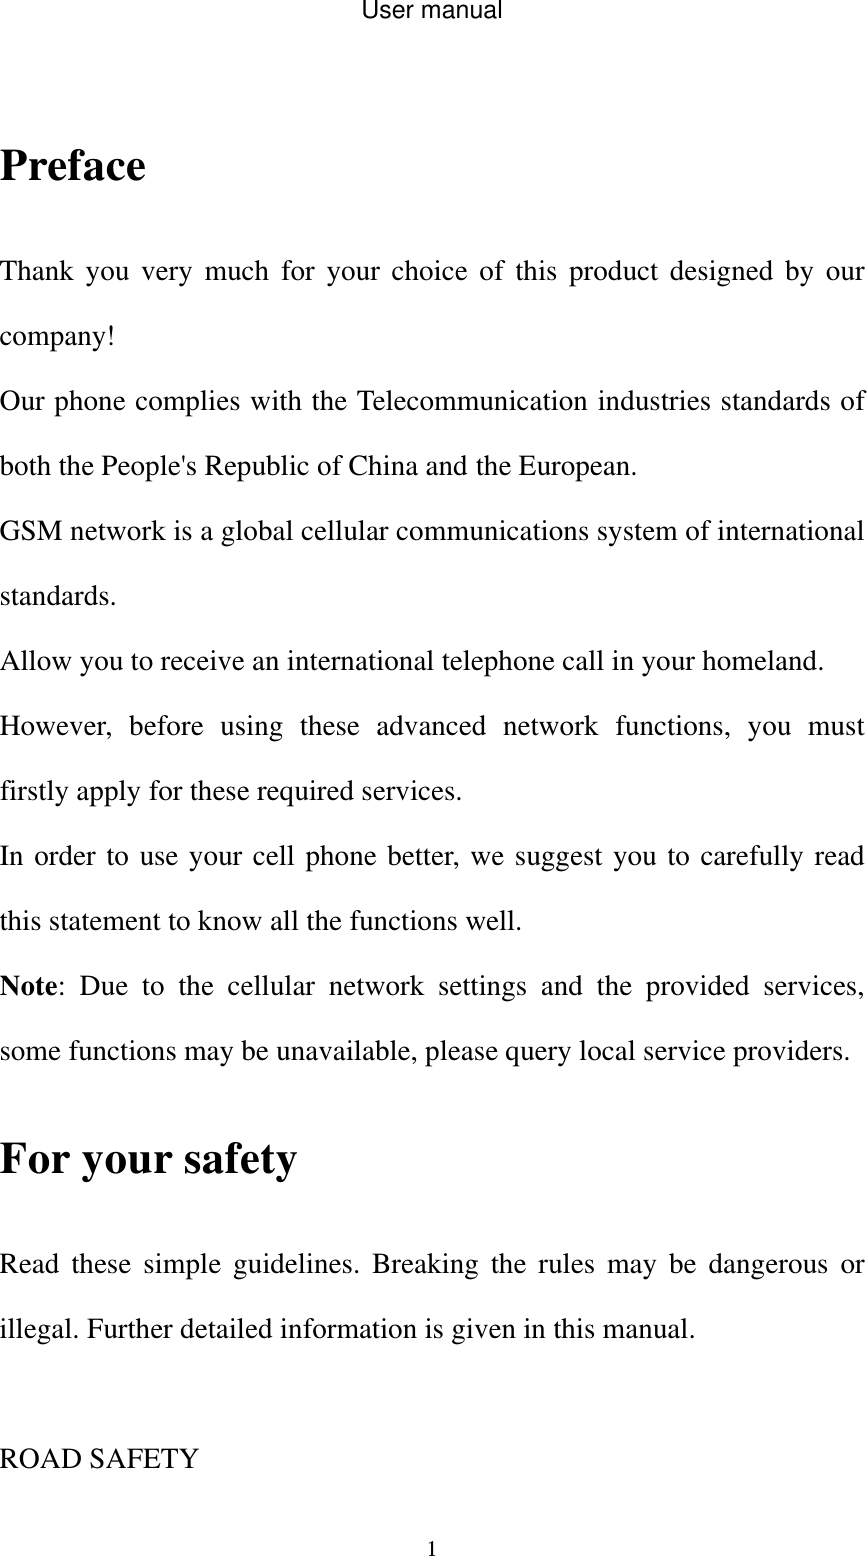 User manual  1                                  Preface  Thank you very much for your choice of this product designed by our company! Our phone complies with the Telecommunication industries standards of both the People&apos;s Republic of China and the European.   GSM network is a global cellular communications system of international standards.  Allow you to receive an international telephone call in your homeland. However, before using these advanced network functions, you must firstly apply for these required services. In order to use your cell phone better, we suggest you to carefully read this statement to know all the functions well. Note: Due to the cellular network settings and the provided services, some functions may be unavailable, please query local service providers. For your safety Read these simple guidelines. Breaking the rules may be dangerous or illegal. Further detailed information is given in this manual.  ROAD SAFETY   